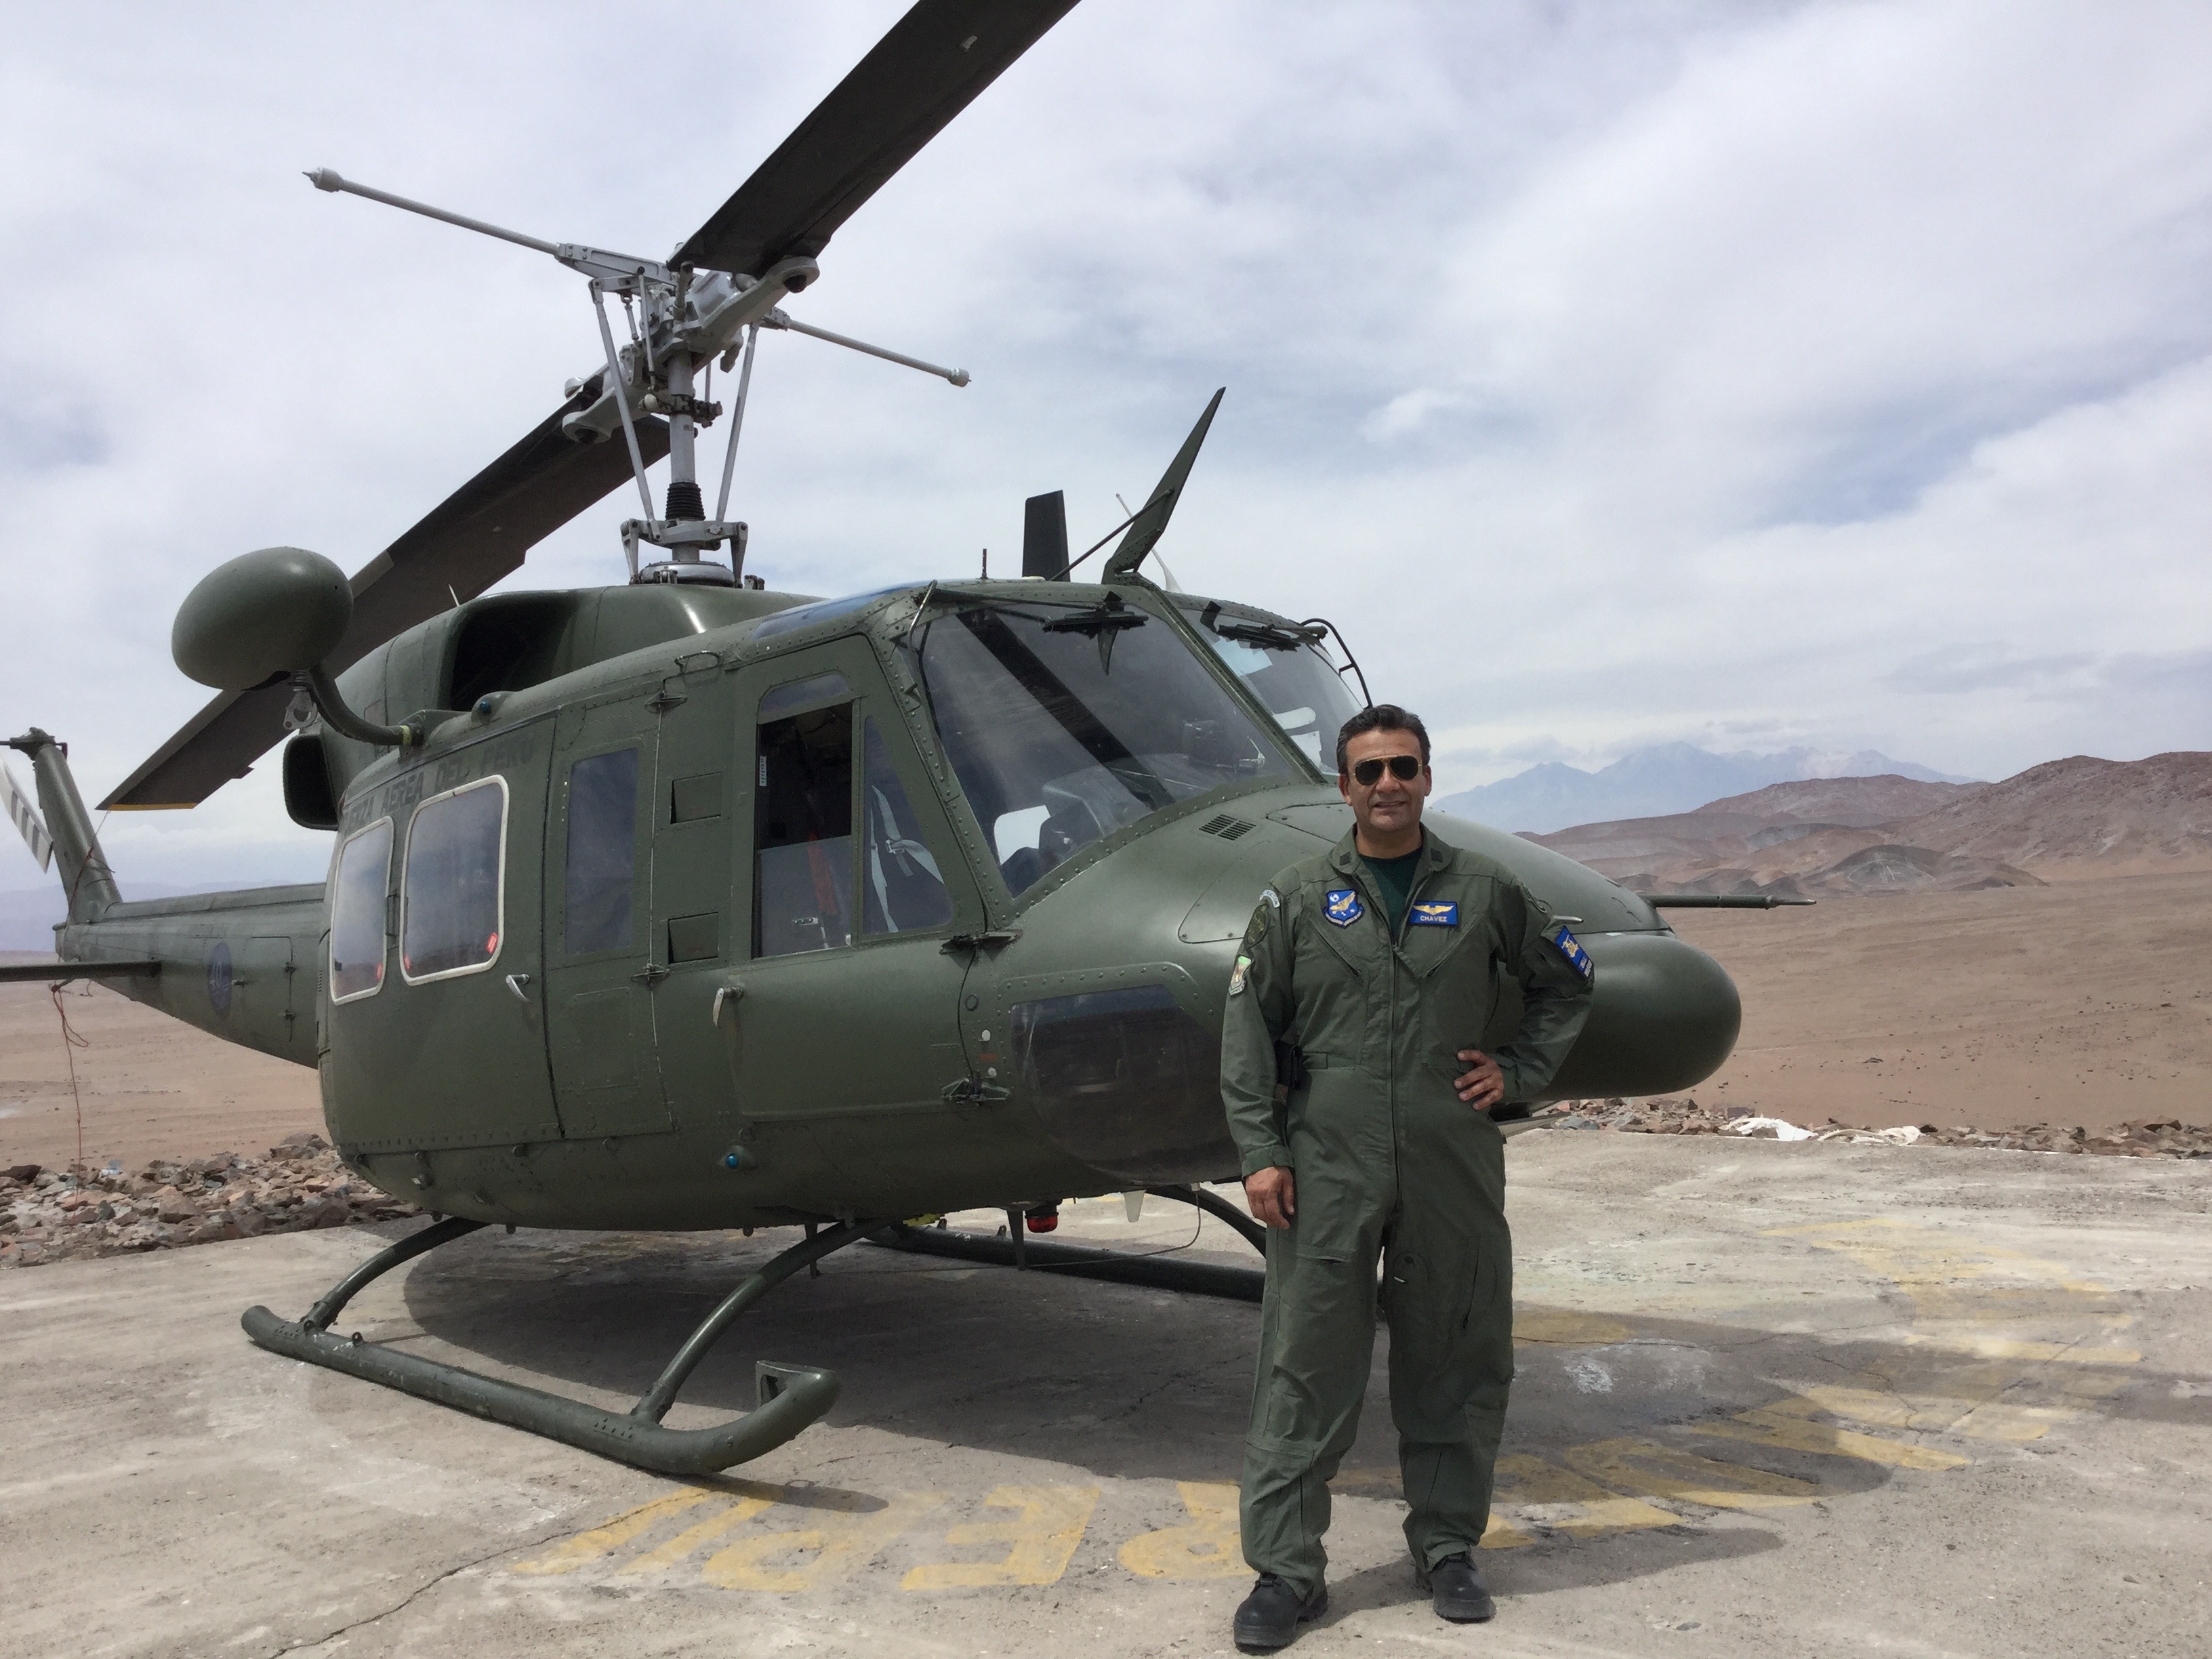 Col. Jaime Chavez Viscarra, retired Airforce Helicopter Pilot in Peru and current Head of Operations for Hombro a Hombro